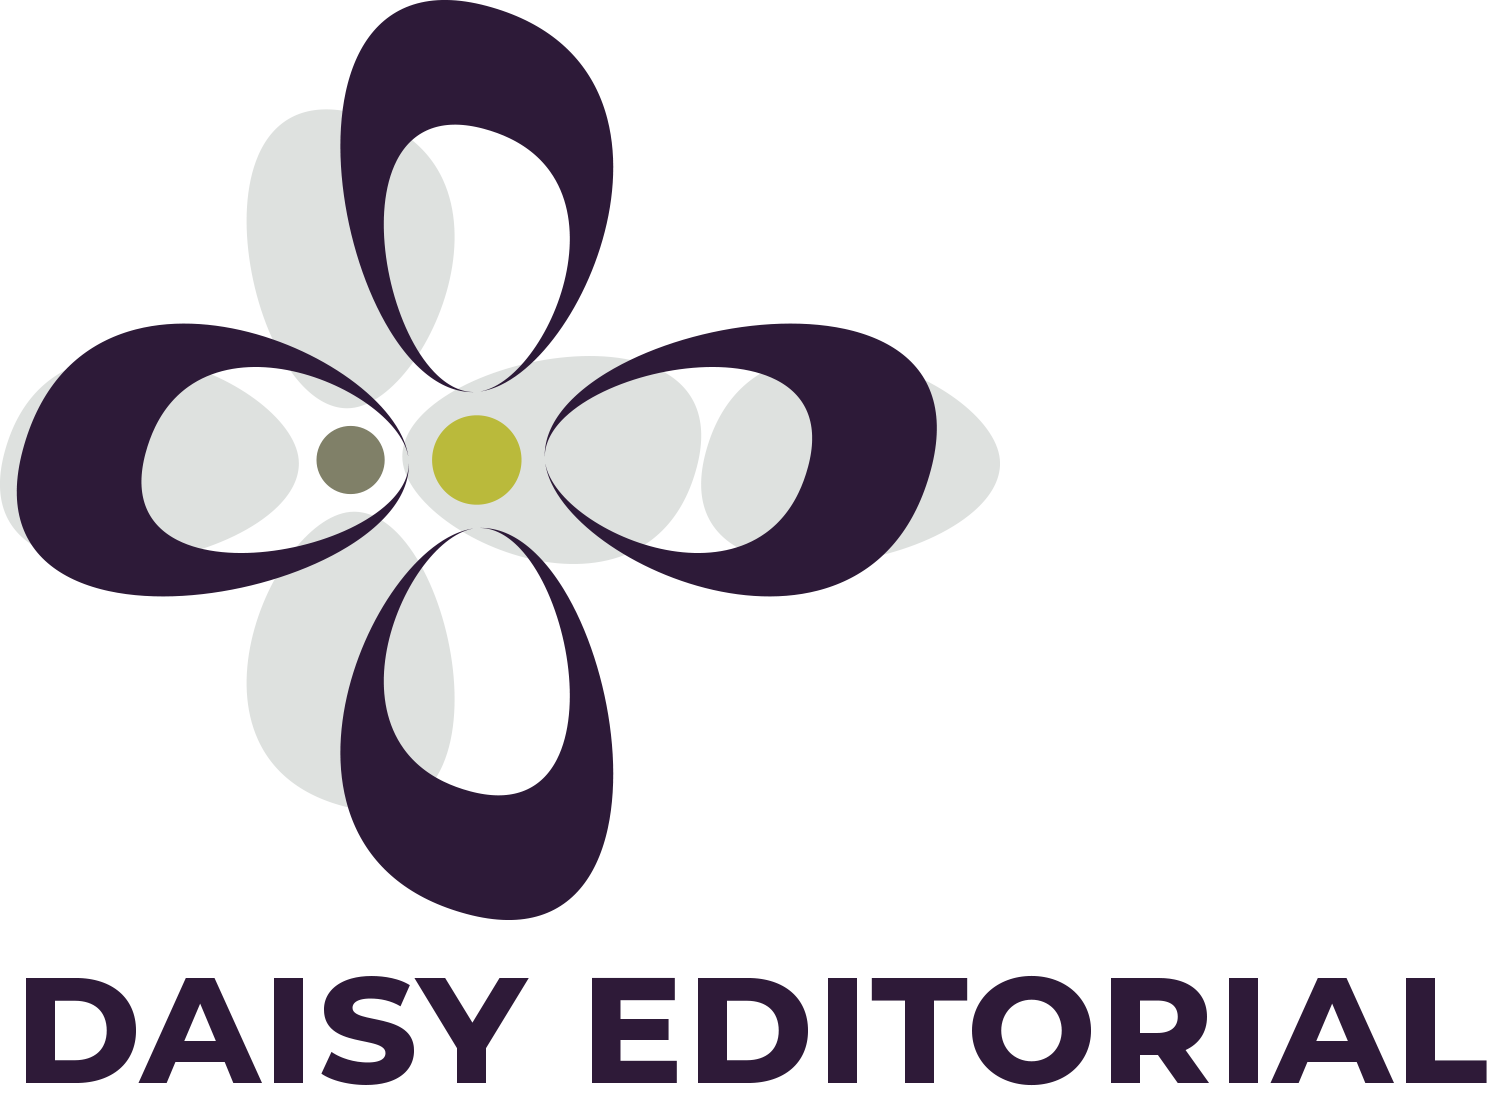 Daisy Editorial proofreading, editing and layout